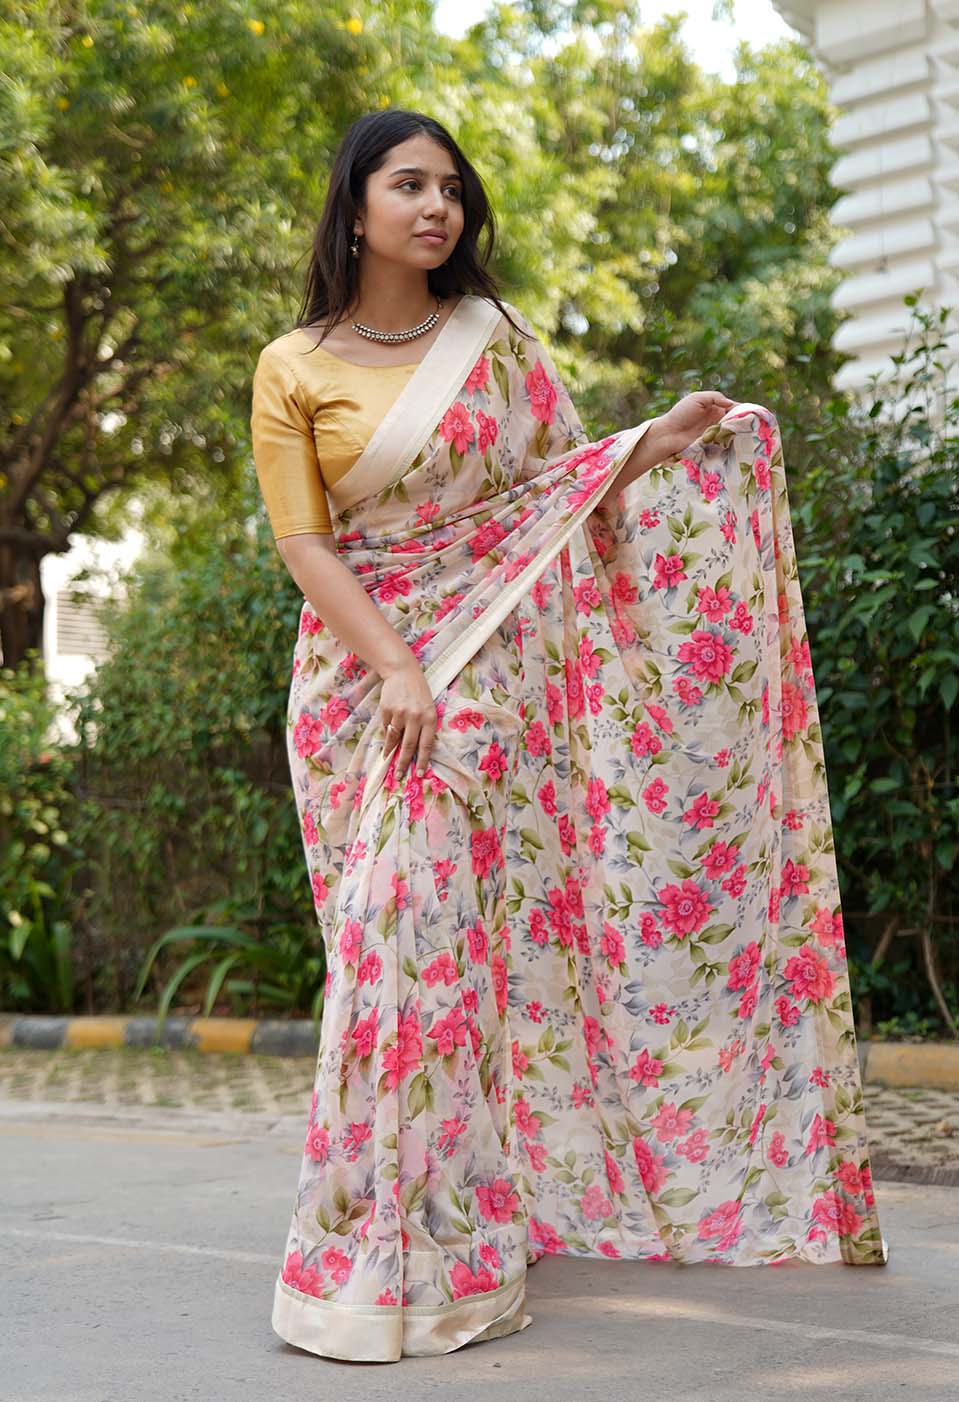 Off-White Soft Pure Georgette Floral Wrap in 1 minute saree